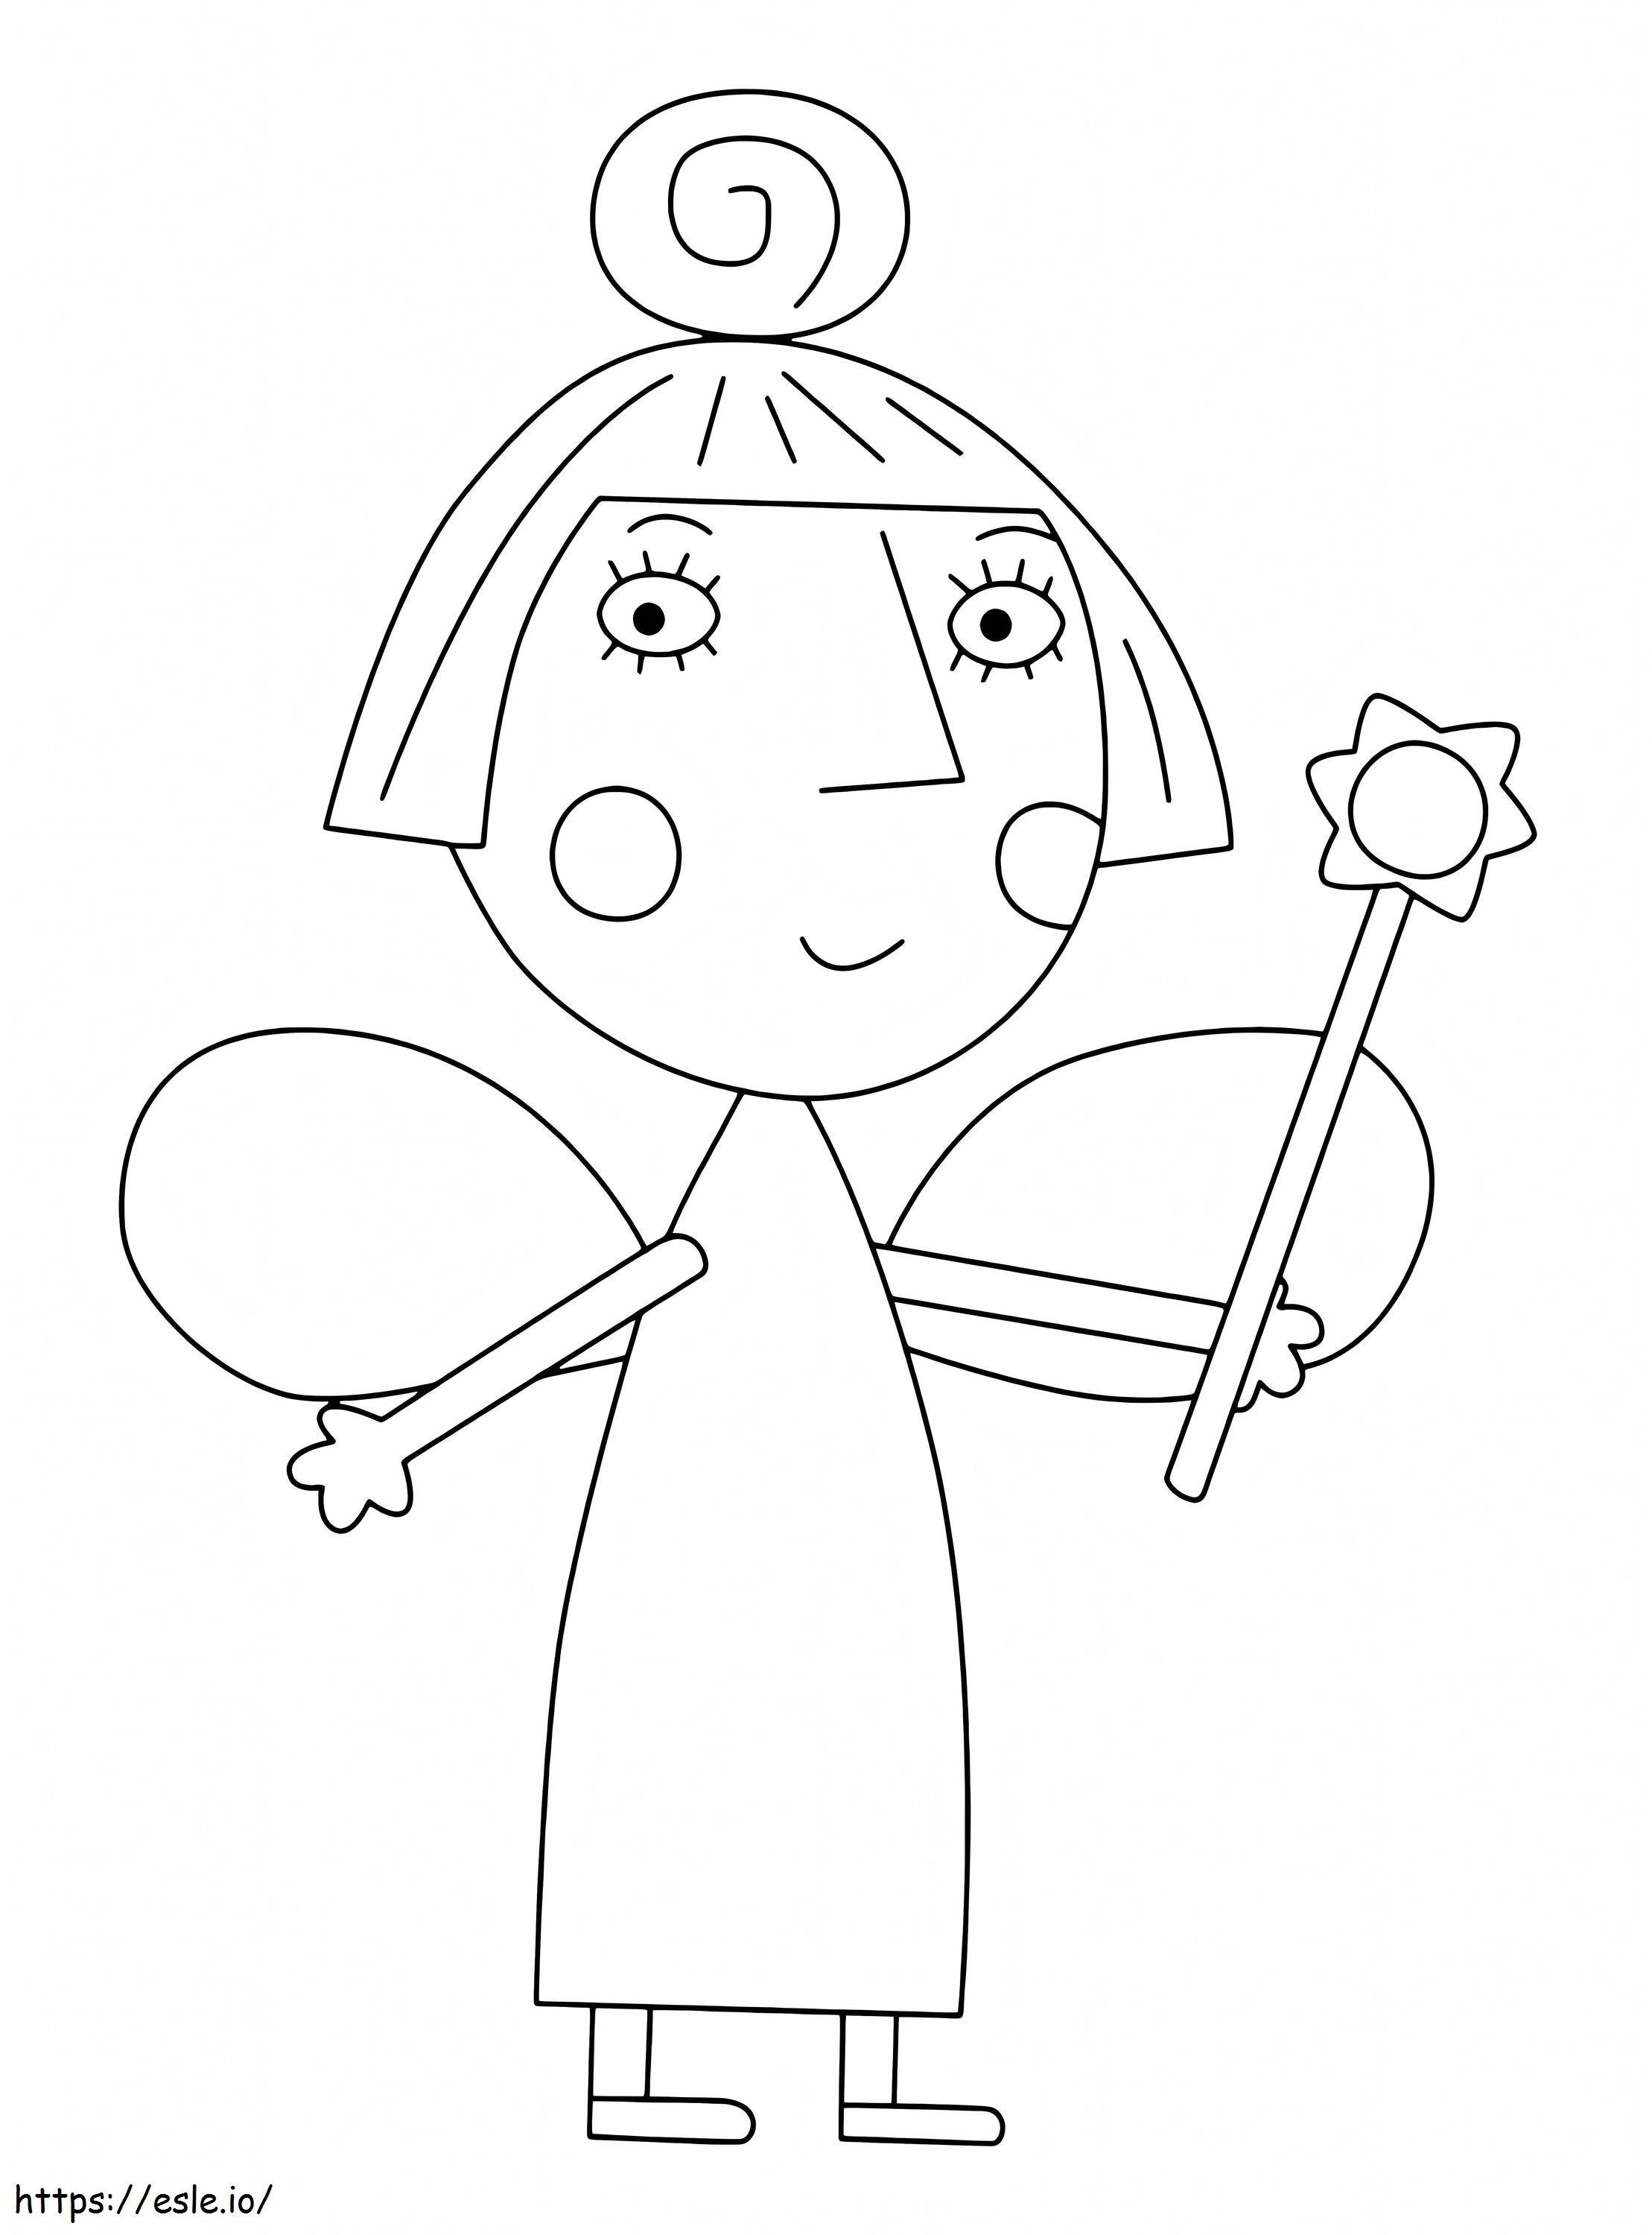 Nanny Plum With Her Magic Wand coloring page